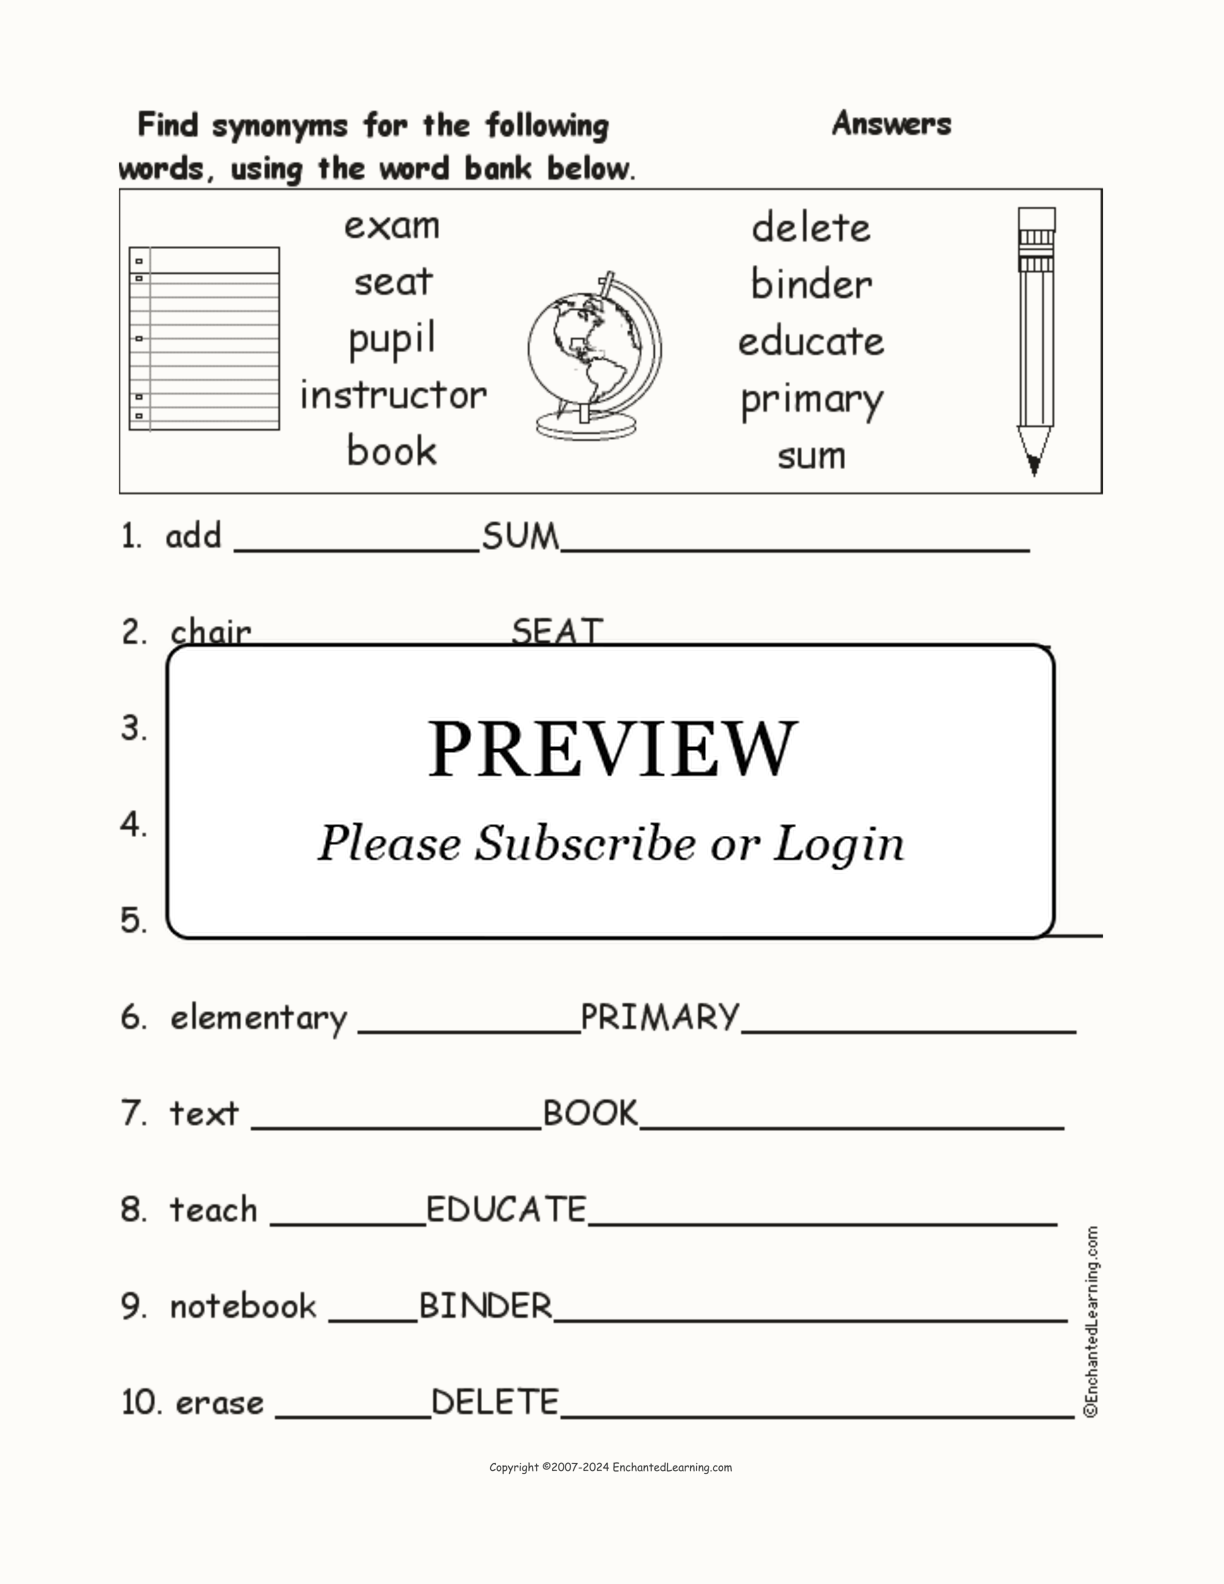 School Synonyms interactive worksheet page 2